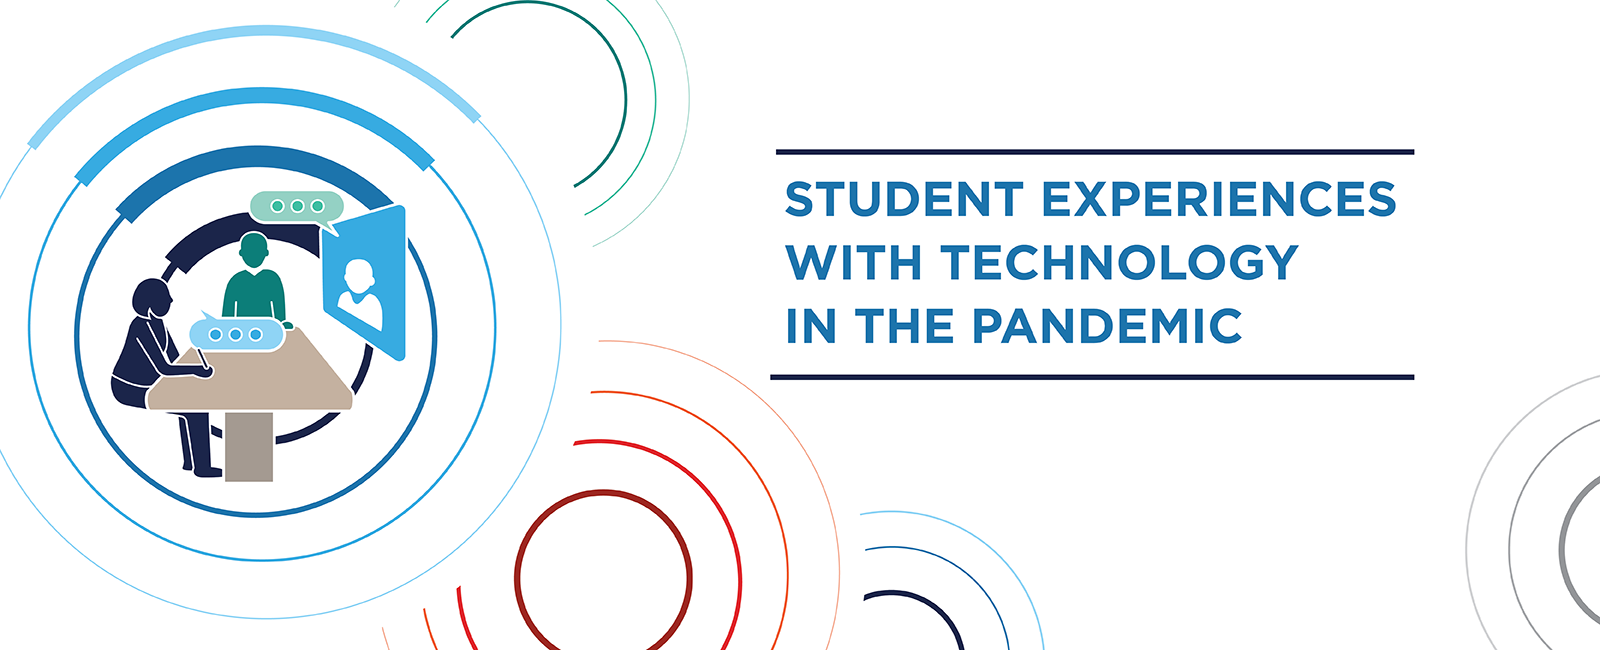 Student Experiences with Technology in the Pandemic